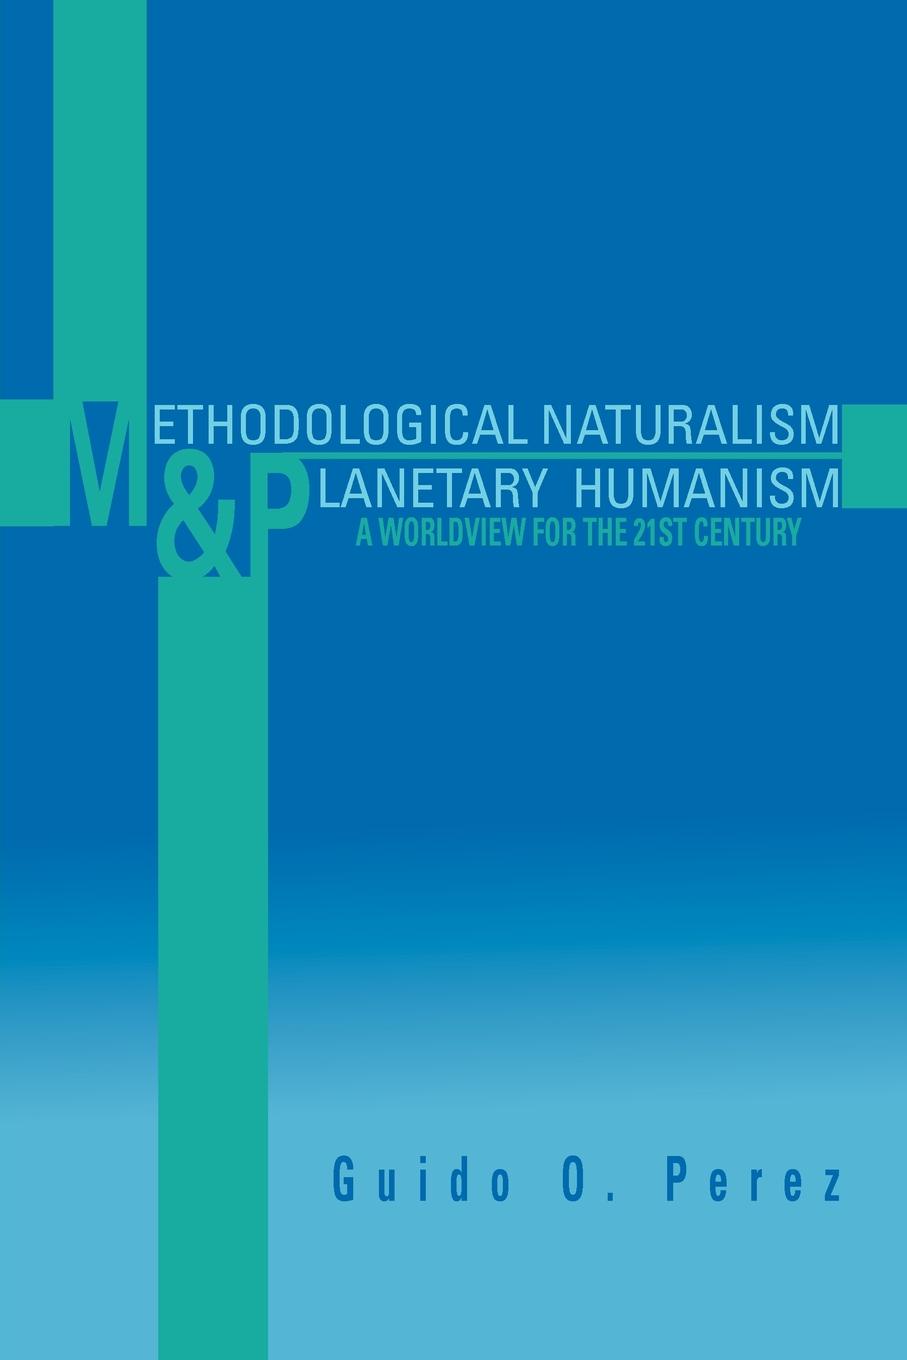 Methodological Naturalism and Planetary Humanism. A Worldview for the 21st Century: A Worldview for the 21st Century